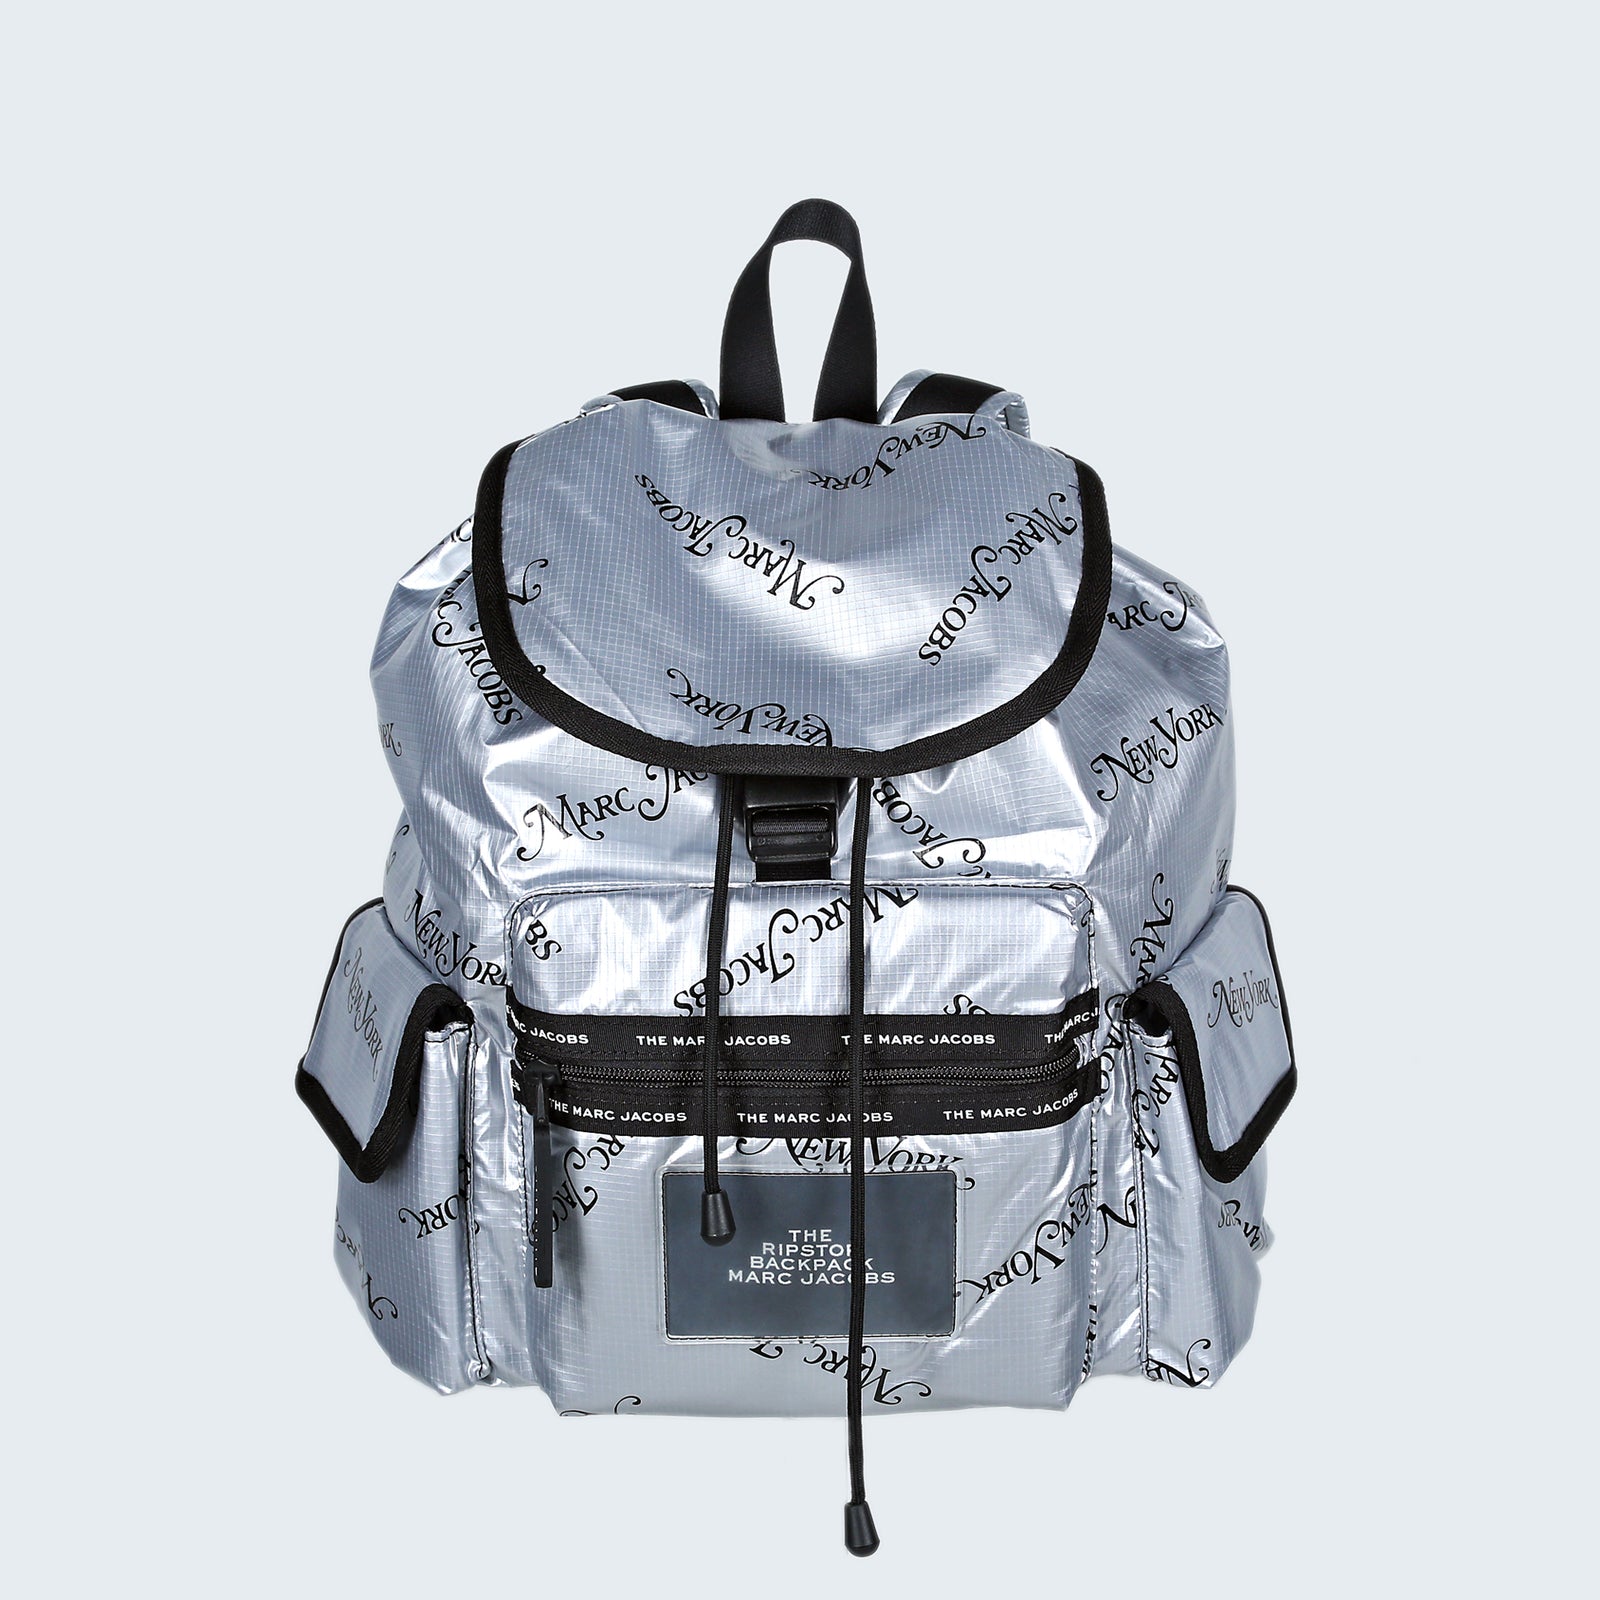 MARC JACOBS BACKPACK - Yooto